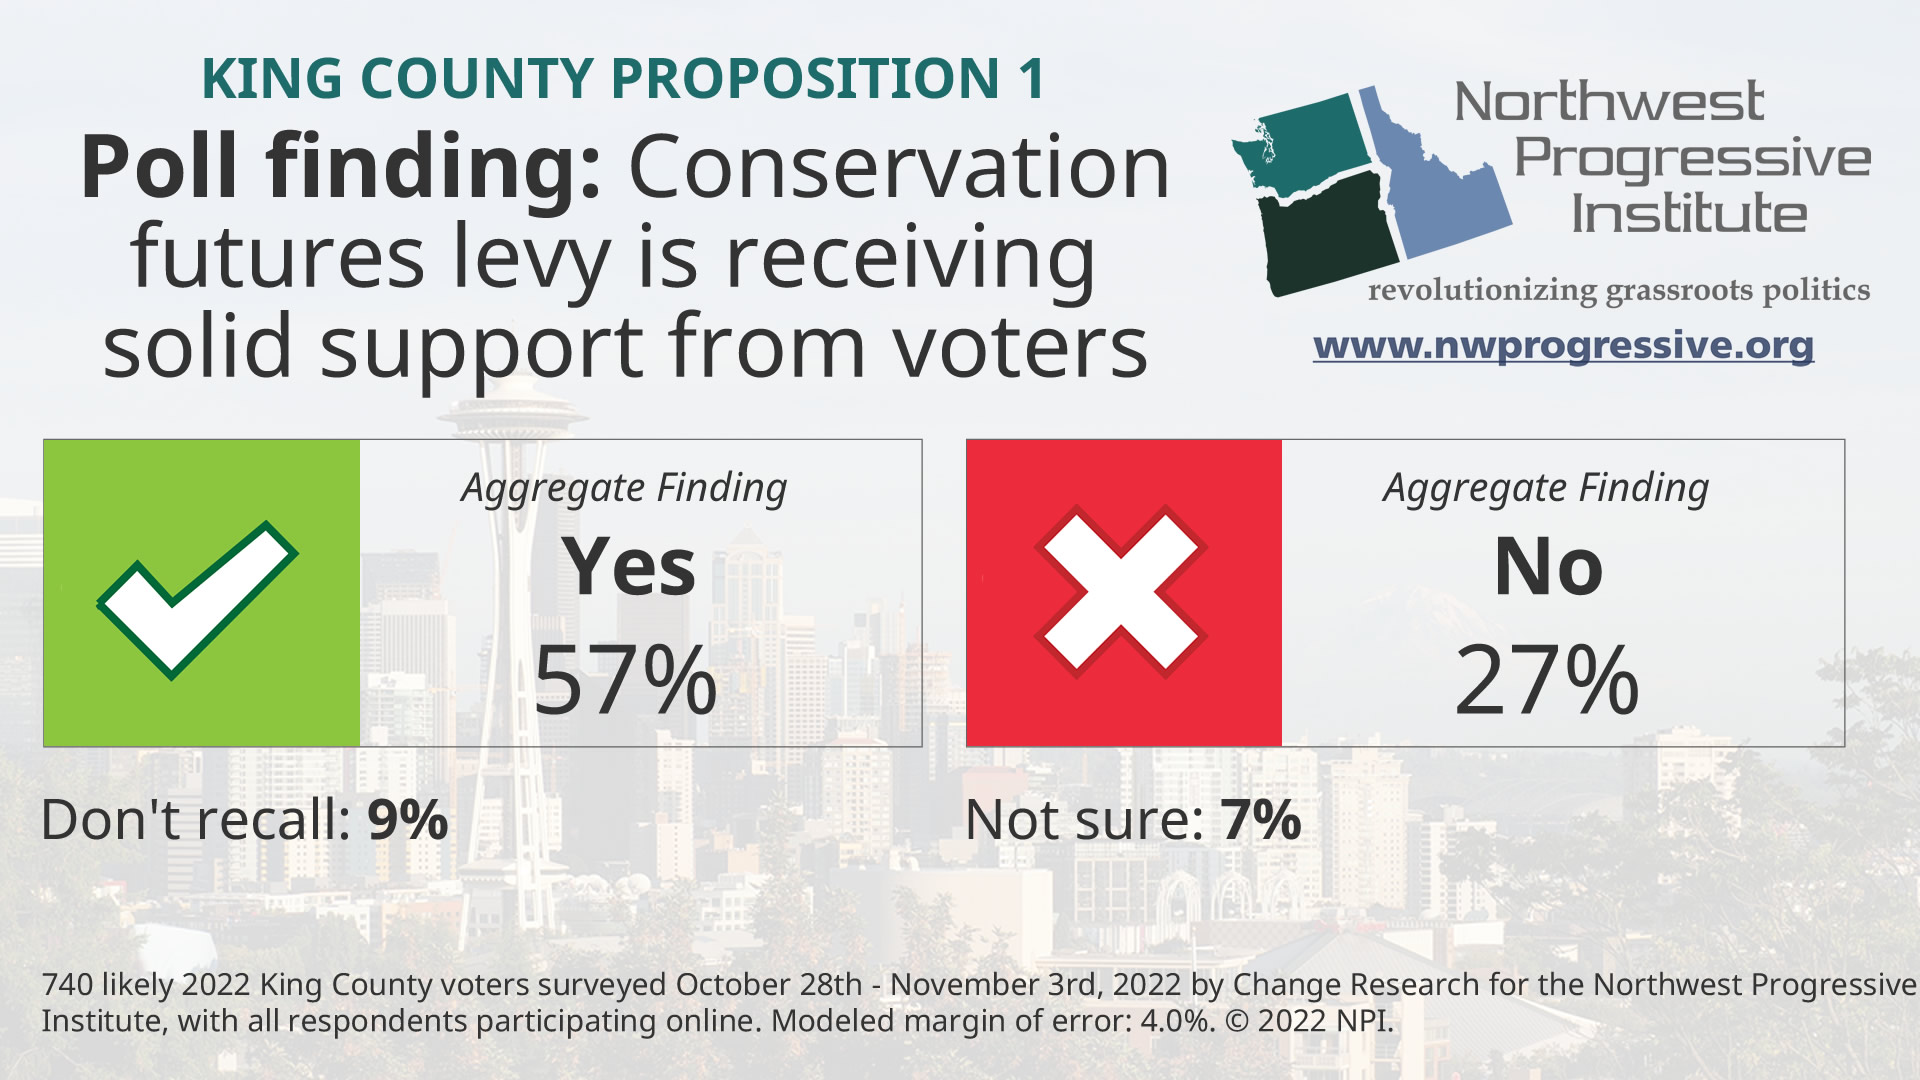 King County Conservation Future Levy poll finding visualization